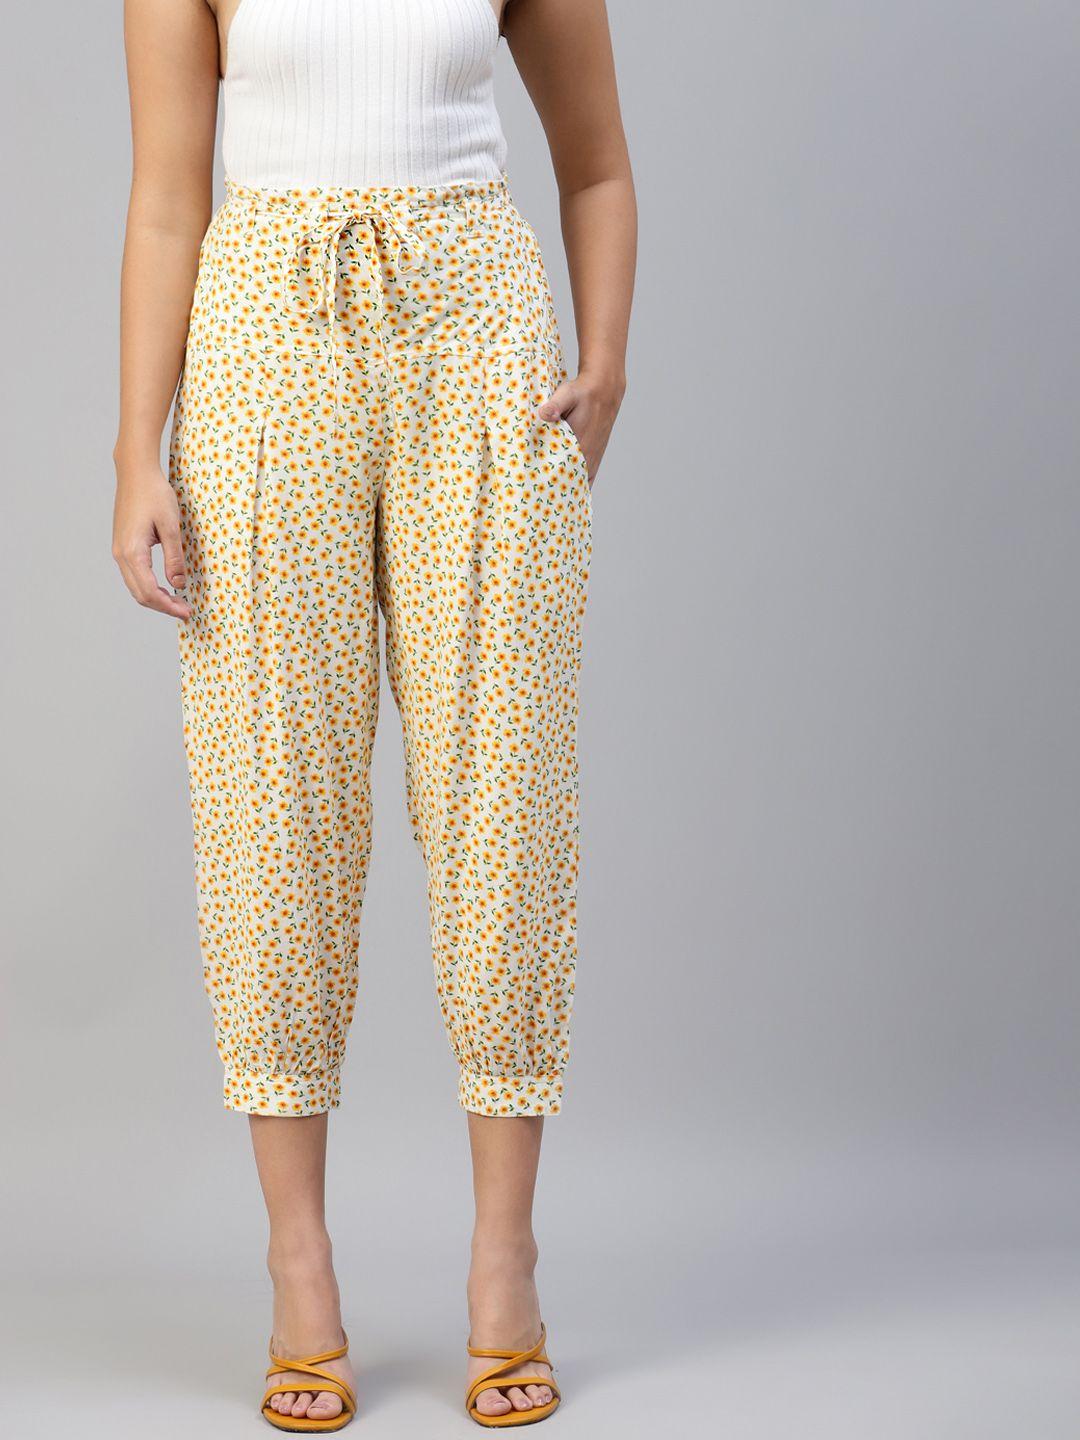 ayaany women white & yellow floral printed harem pants